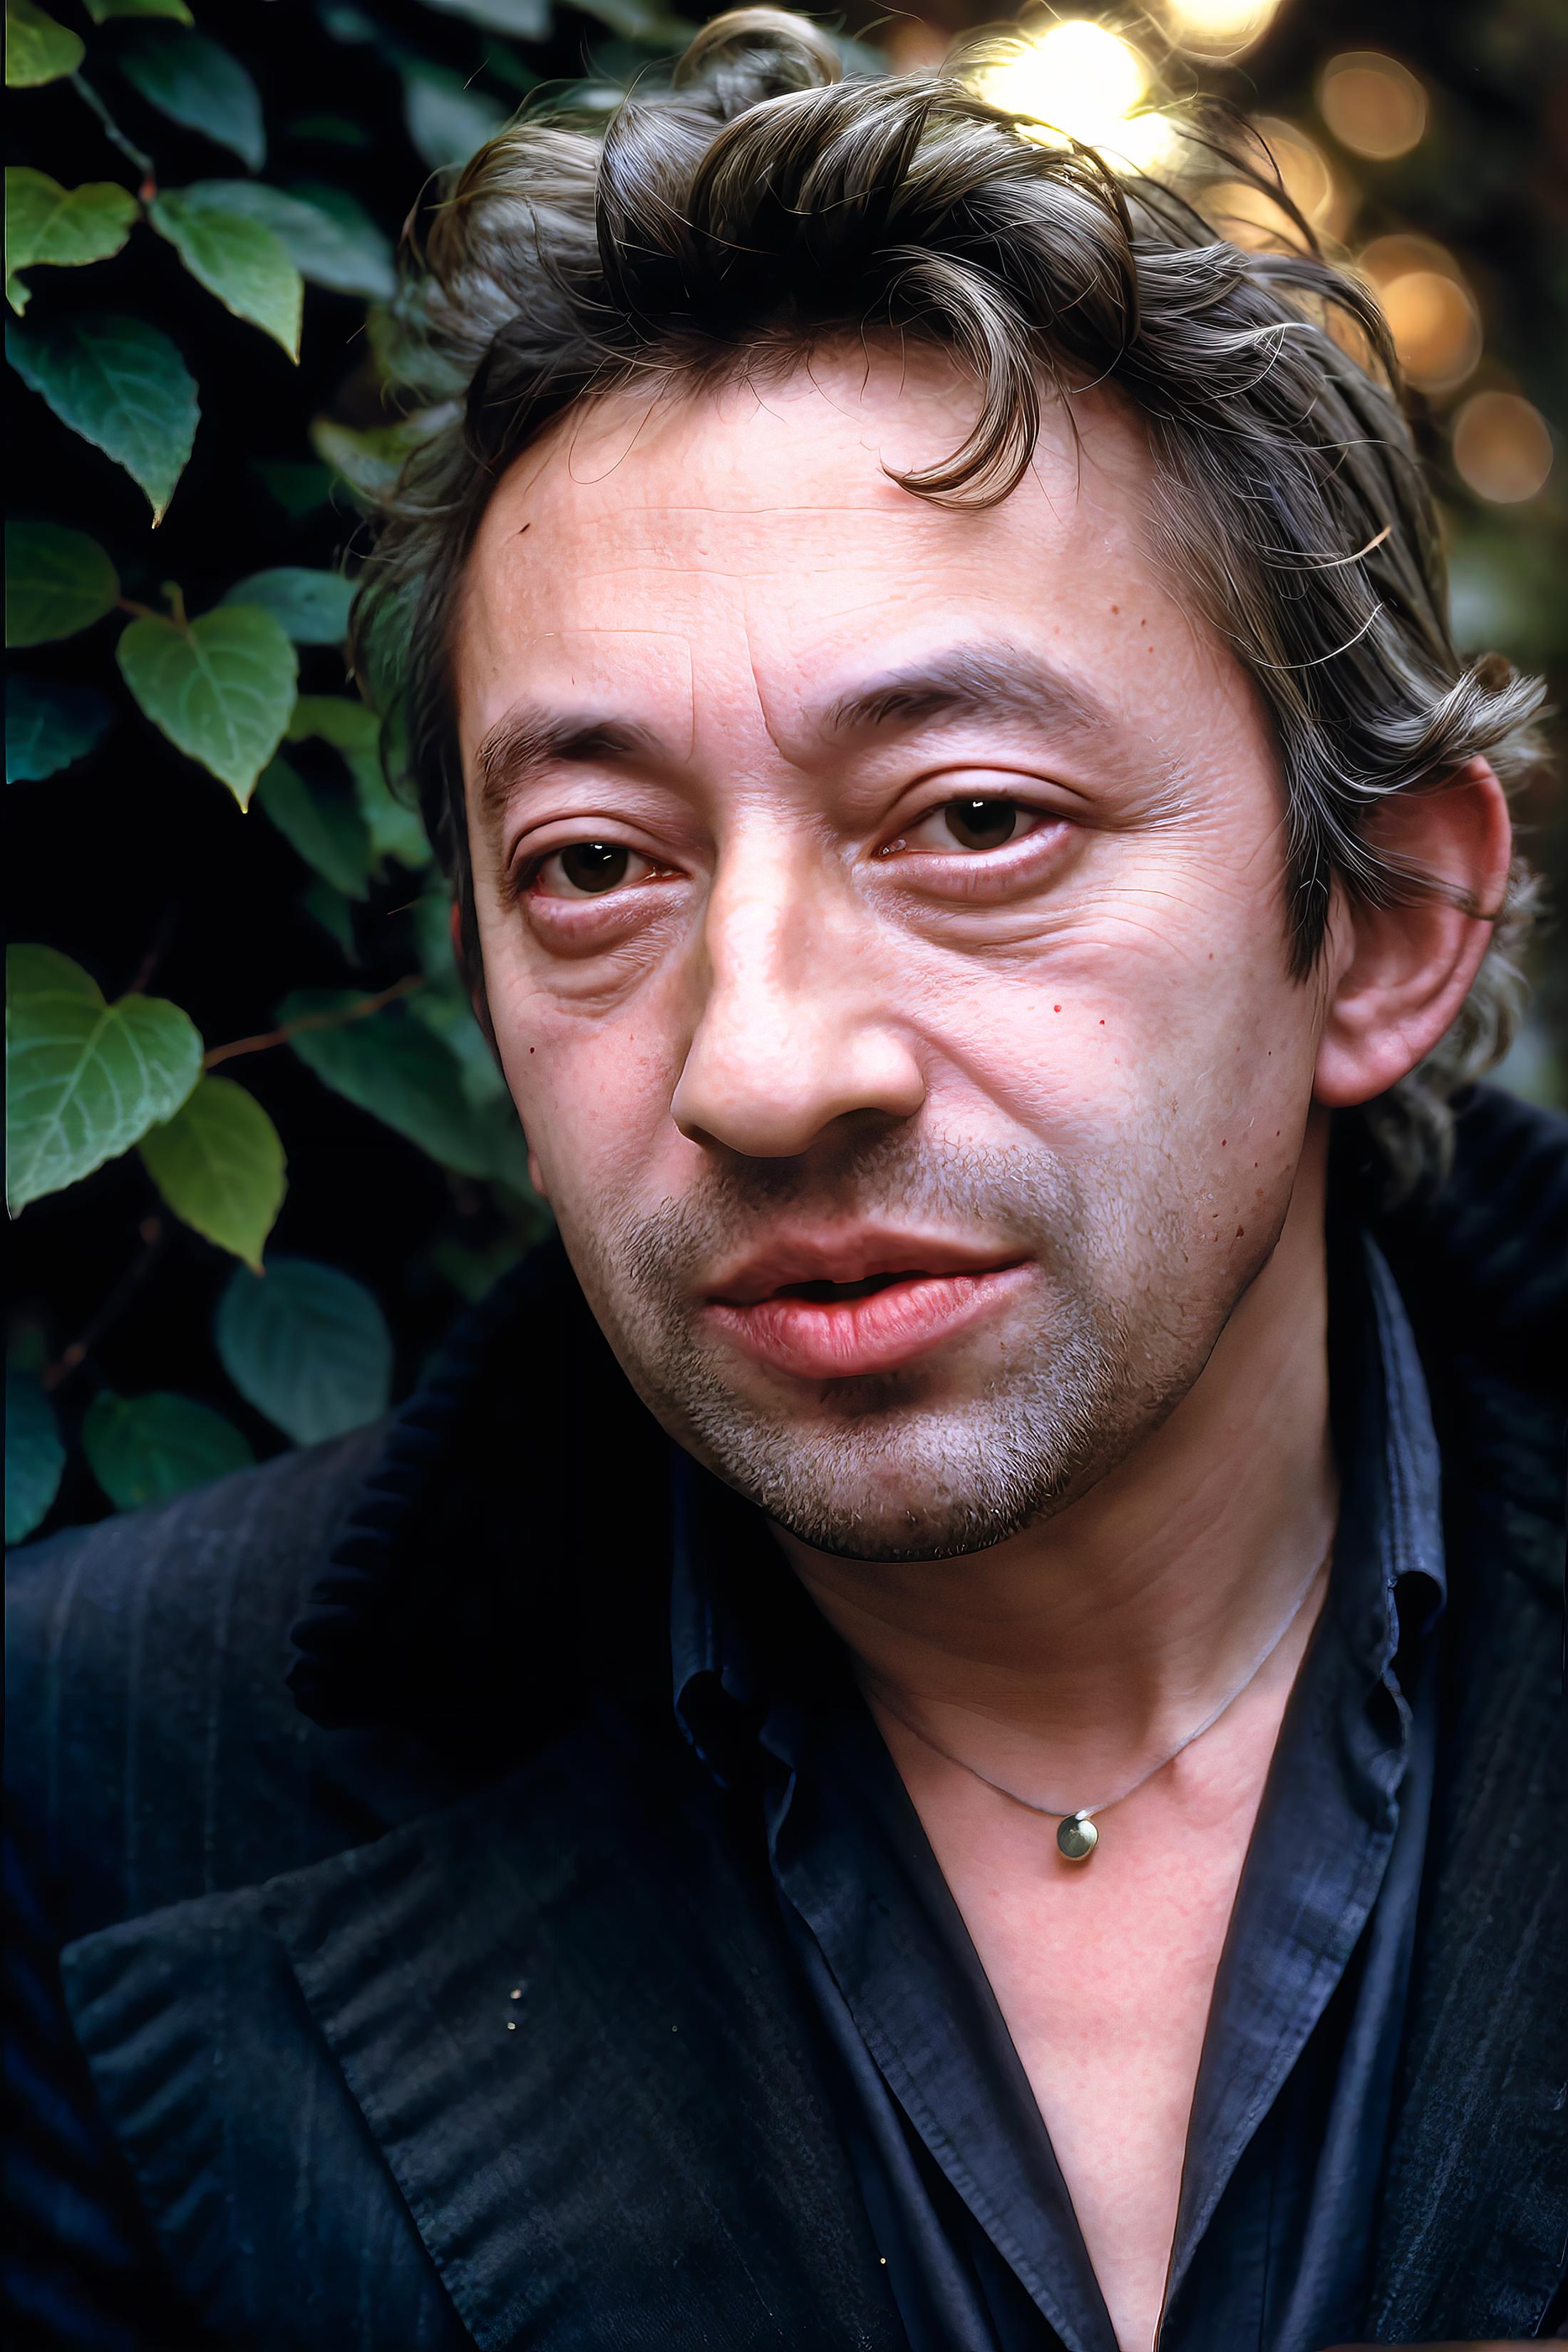 Serge Gainsbourg image by Cyberdelia